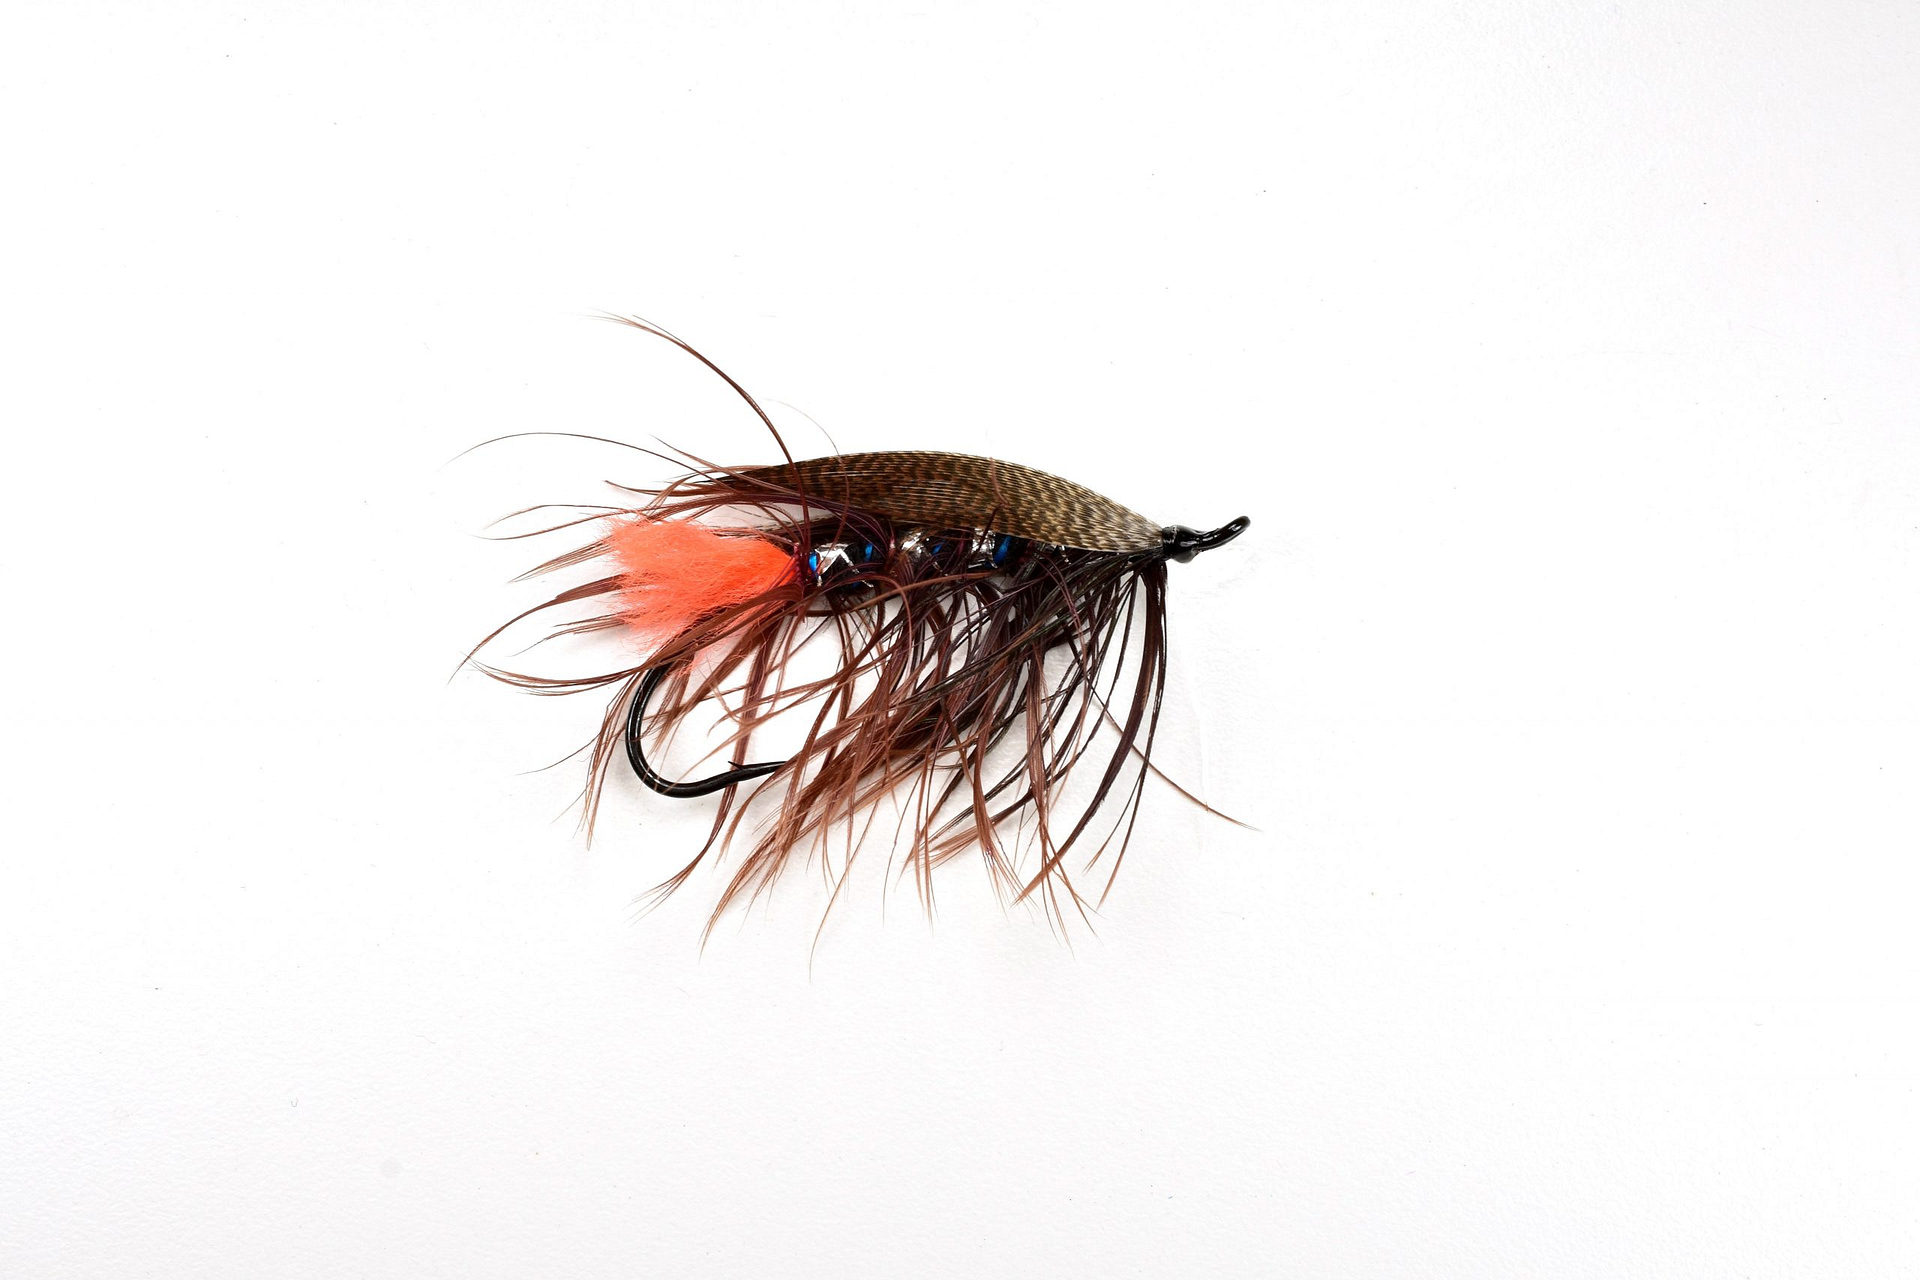 Fly tying Heron Feathers For Spey Flies